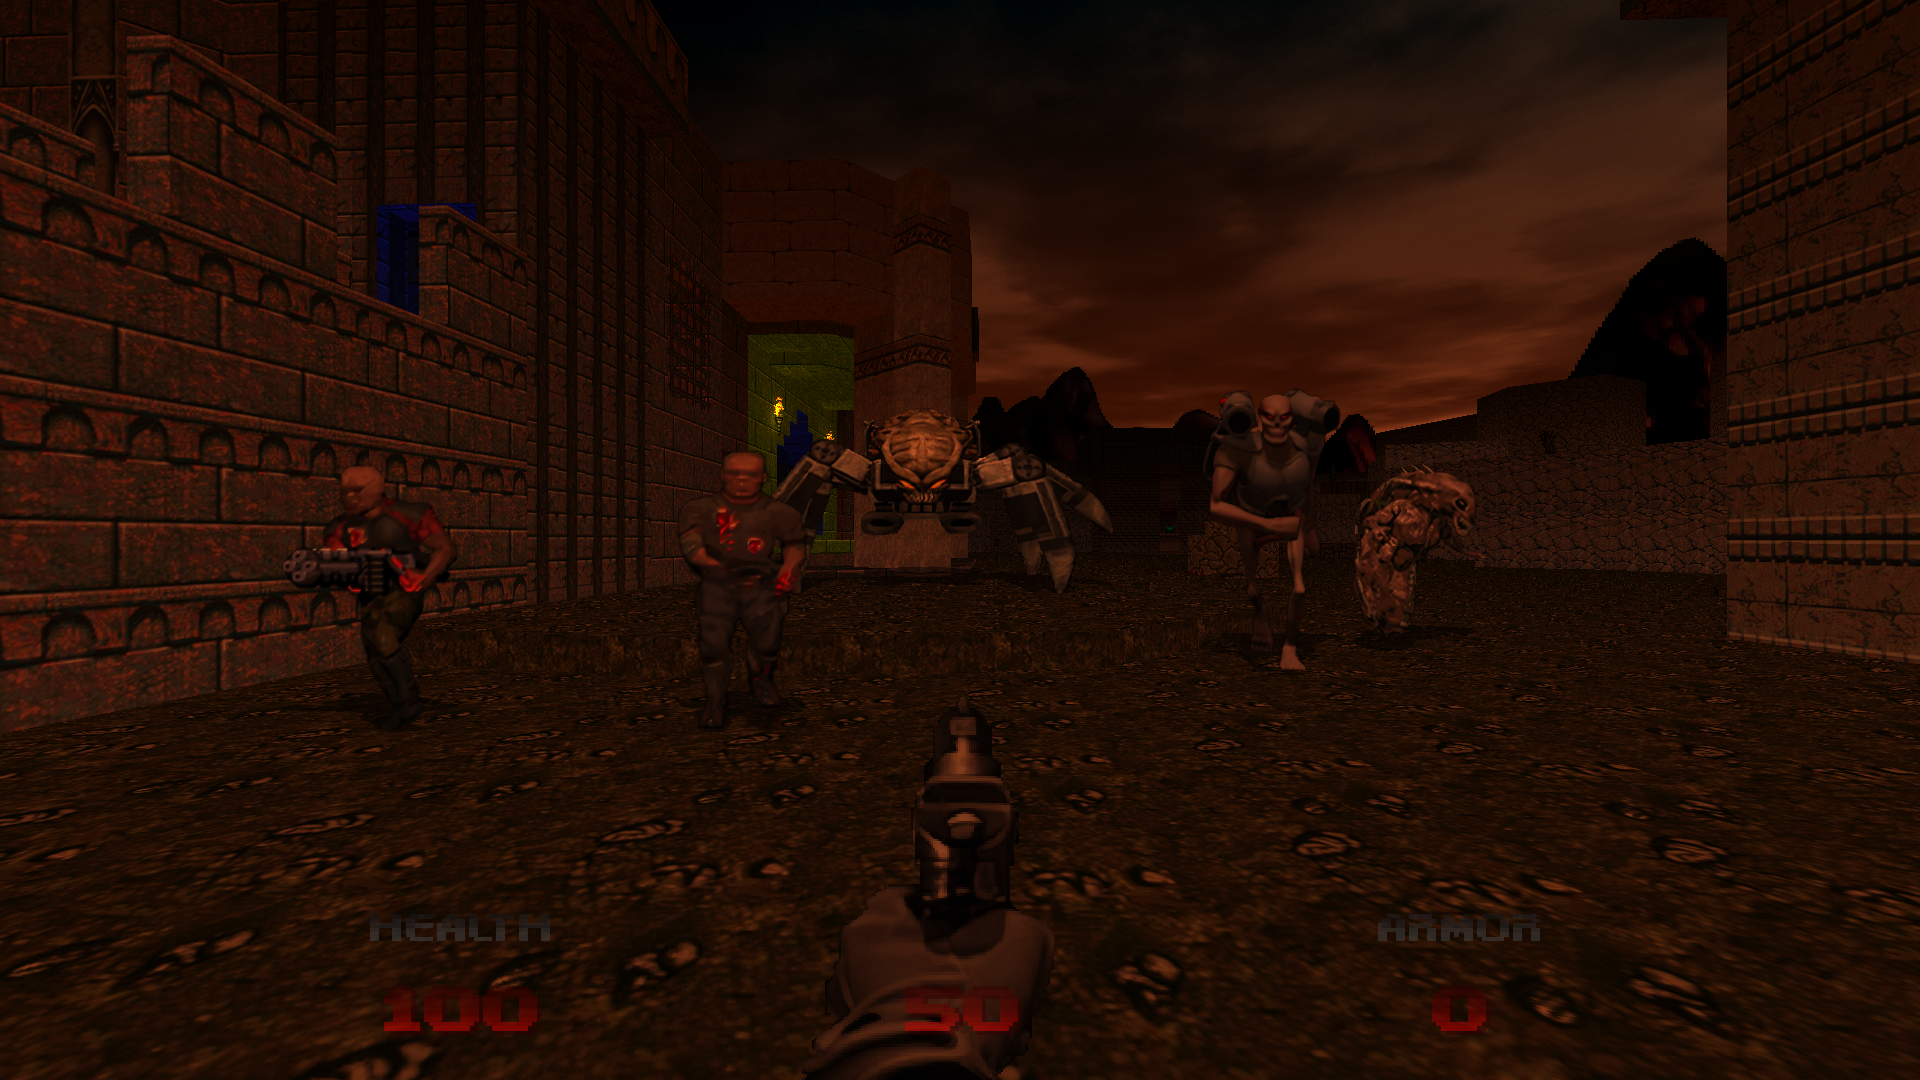 Preview of DOOM 64 CE placeholders for the missing Doom 64 monsters